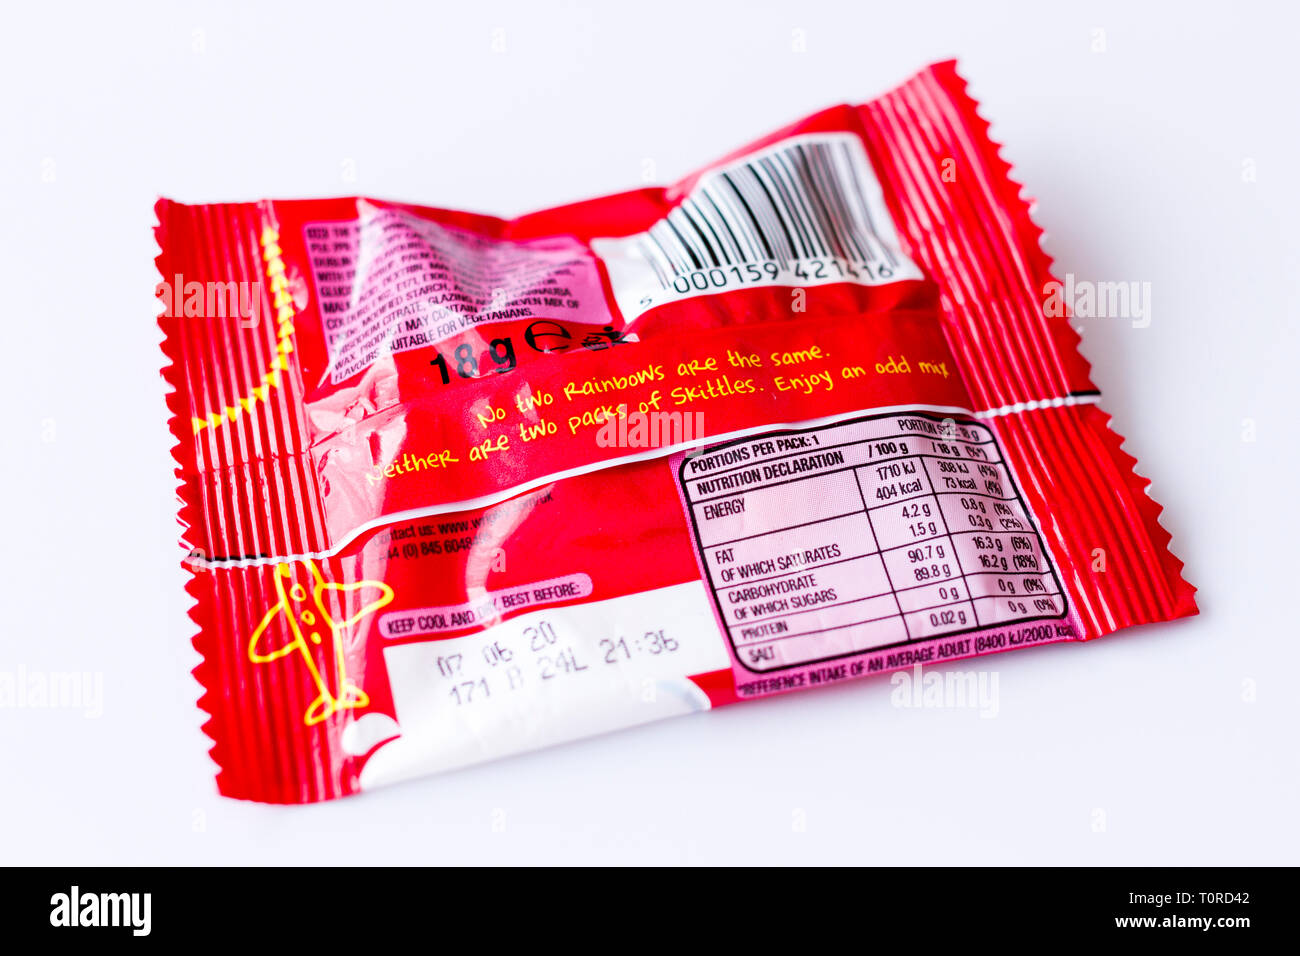 Nutrition declaration information on the back of a packet of Skittles sweets, candy. United Kingdom Stock Photo